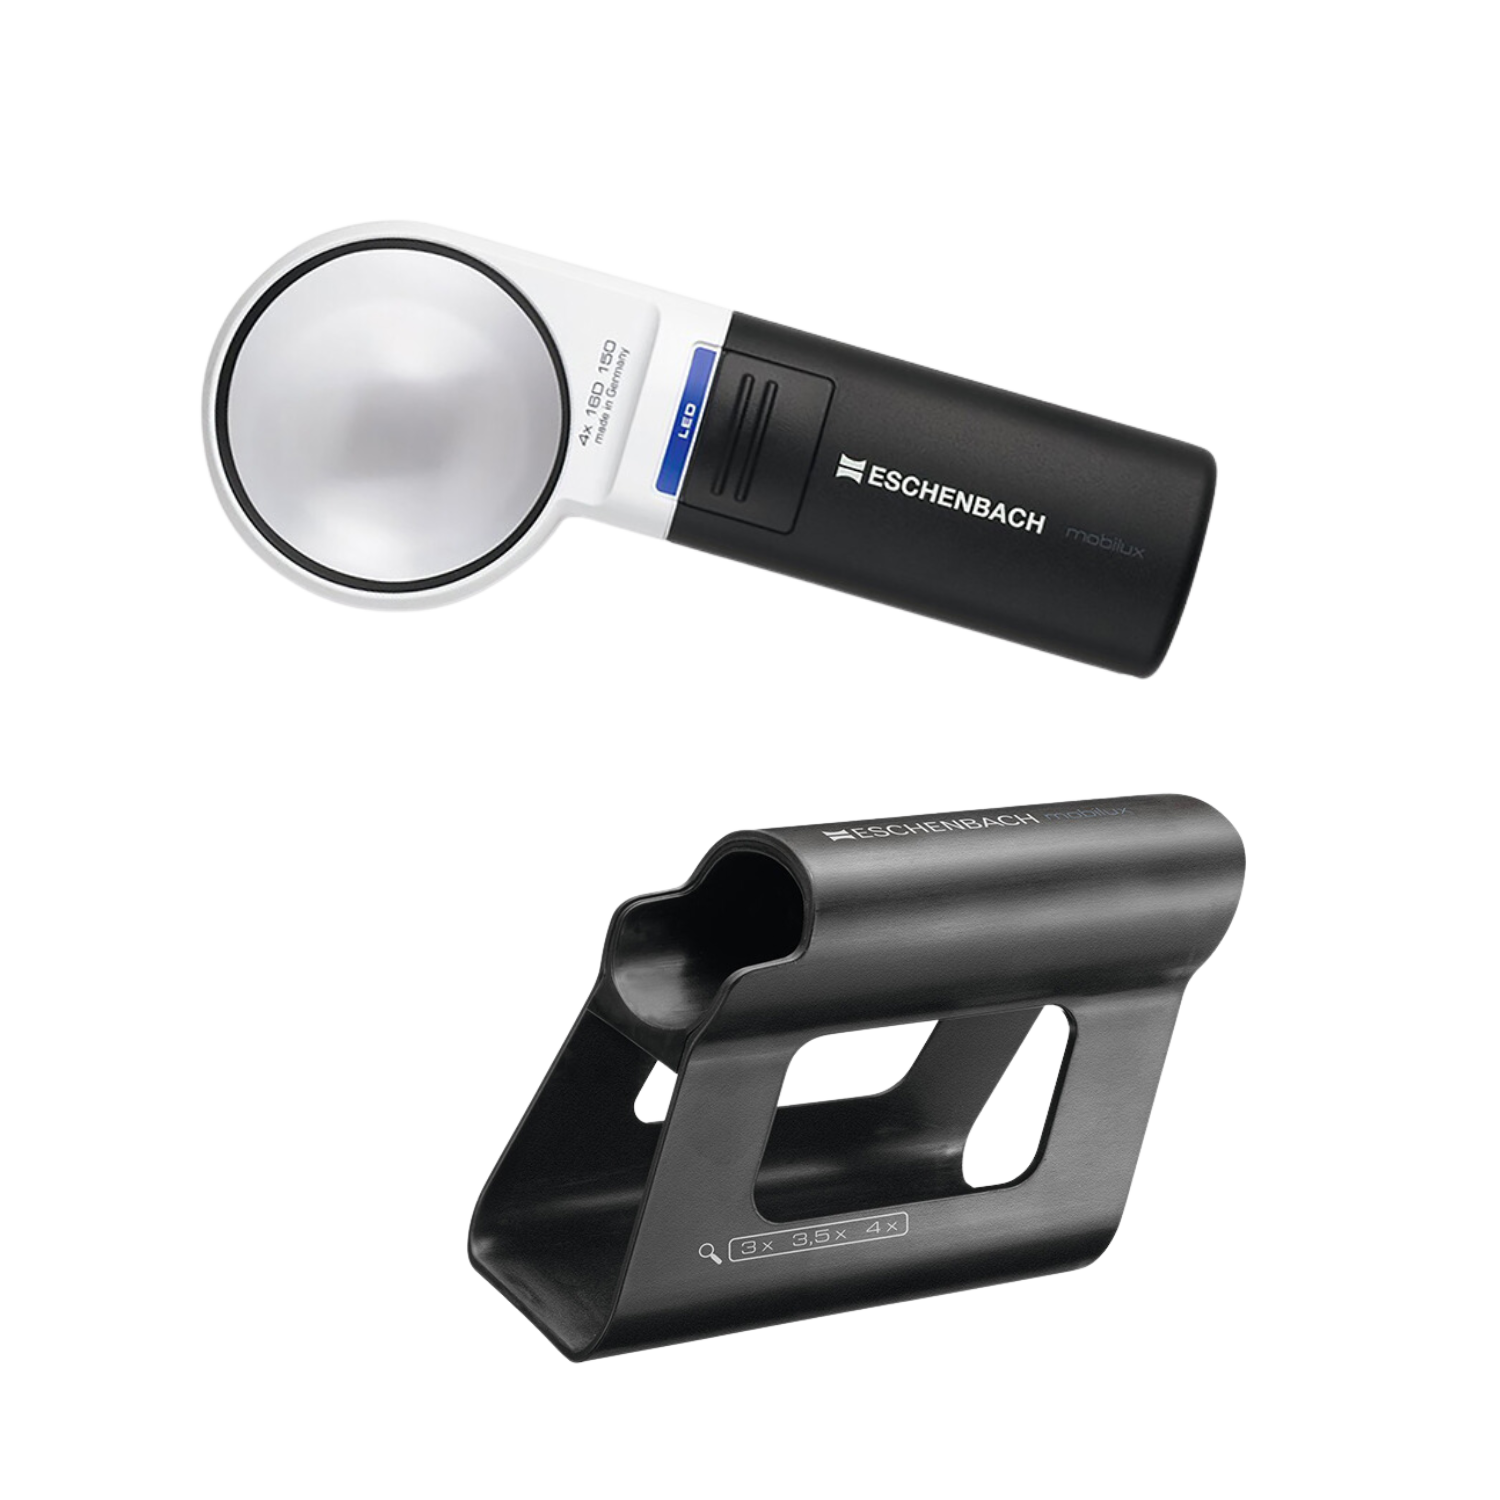 Image of the 4x Round Mobilux handheld magnifier with Mobase stand from Eschenbach.